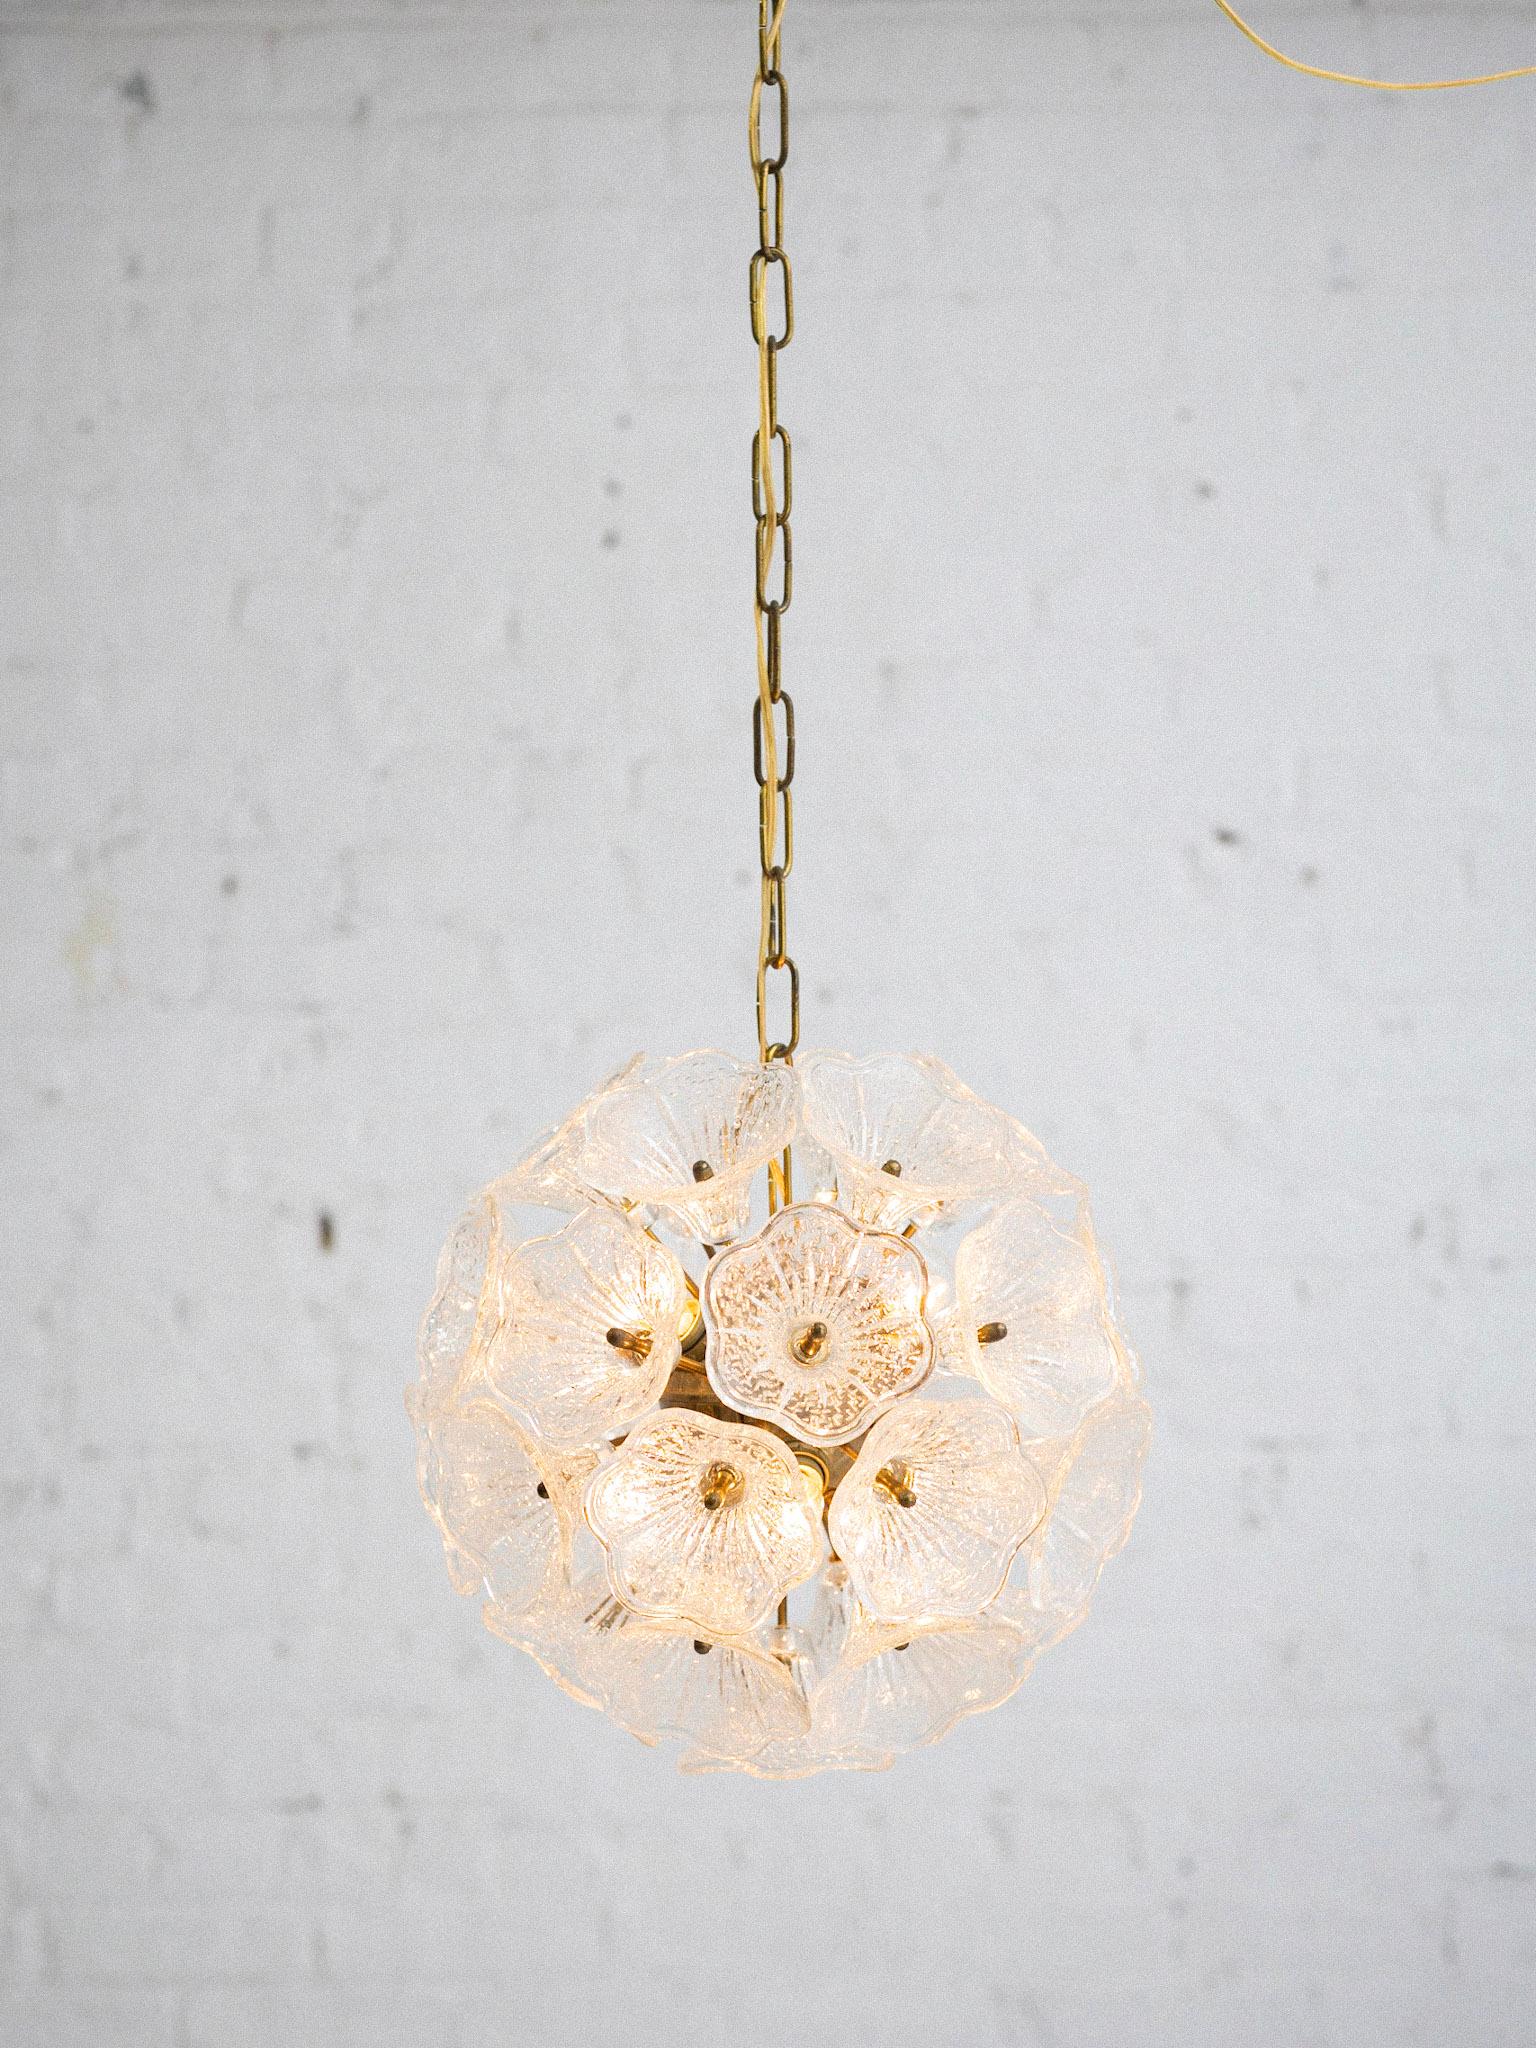 An Italian Murano glass chandelier attributed to Paolo Venini for VeArt. Handblown glass flowers are held by brass hardware radiating from a center brass orb. Wiring recently updated to suit American standards. Current chain measures 28”.